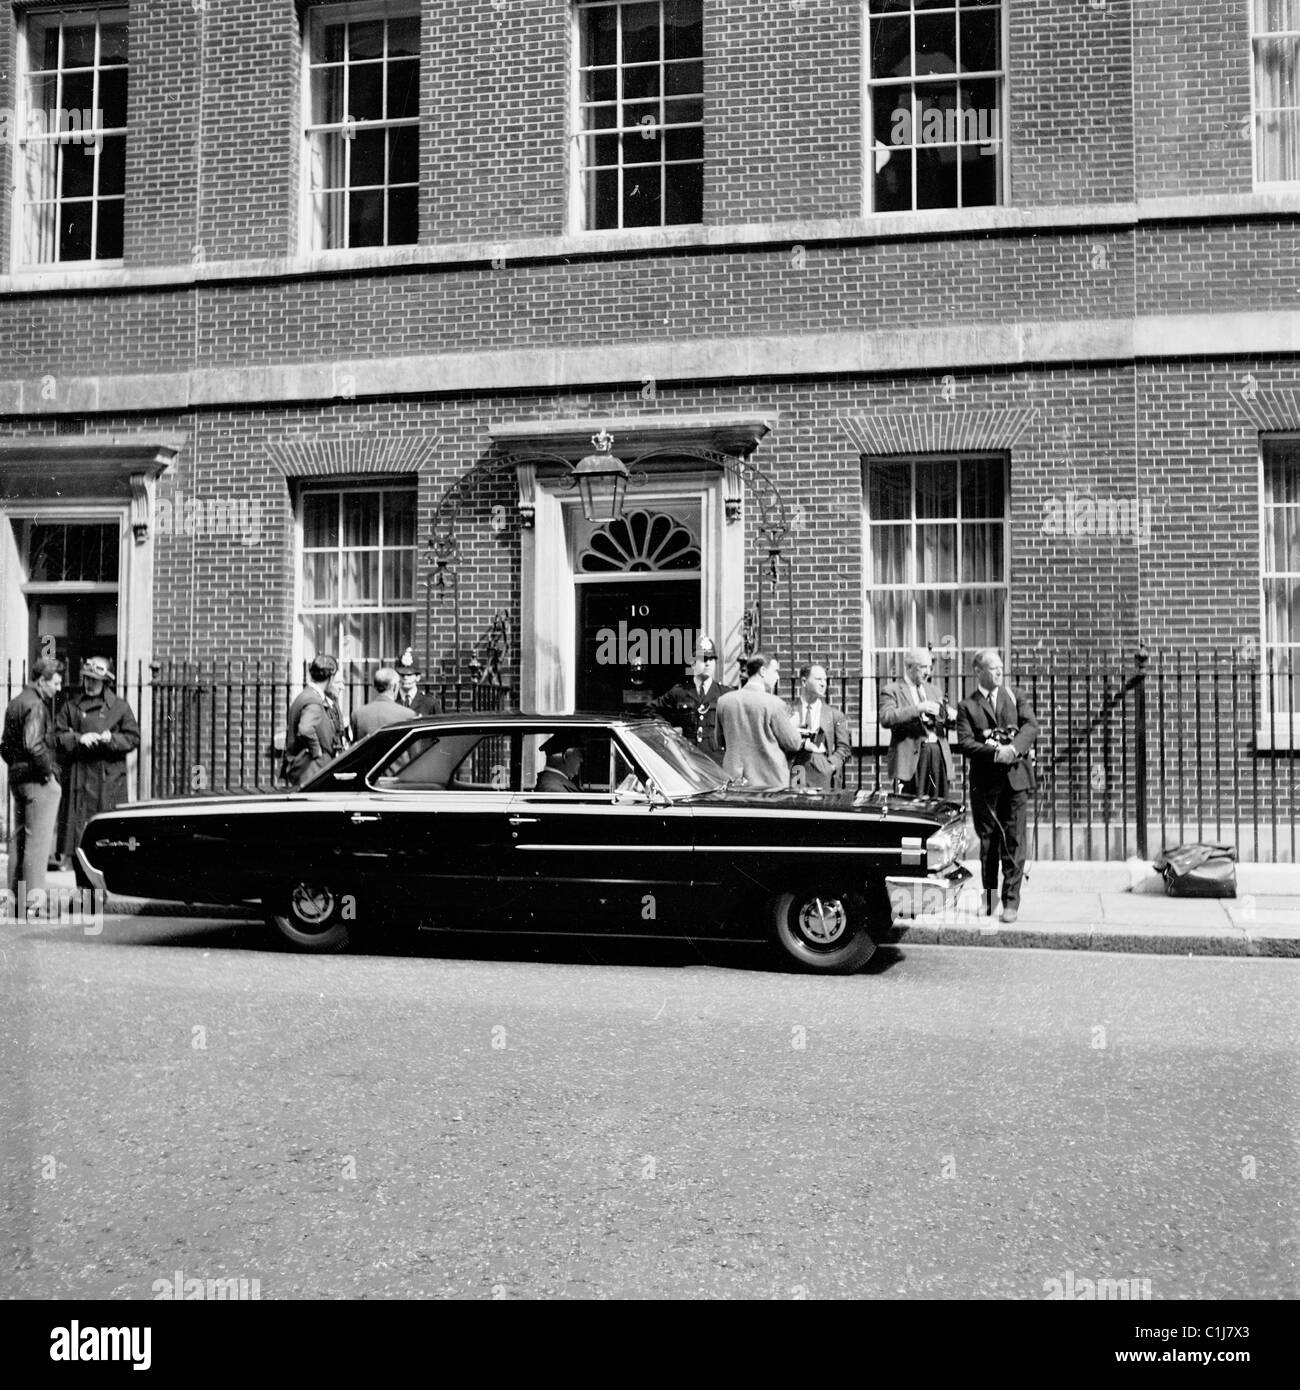 London,1960s, a driver of an American car waits as journalists and photographers gather outside No 10 Downing Street, home to the UK Prime Minister. Stock Photo